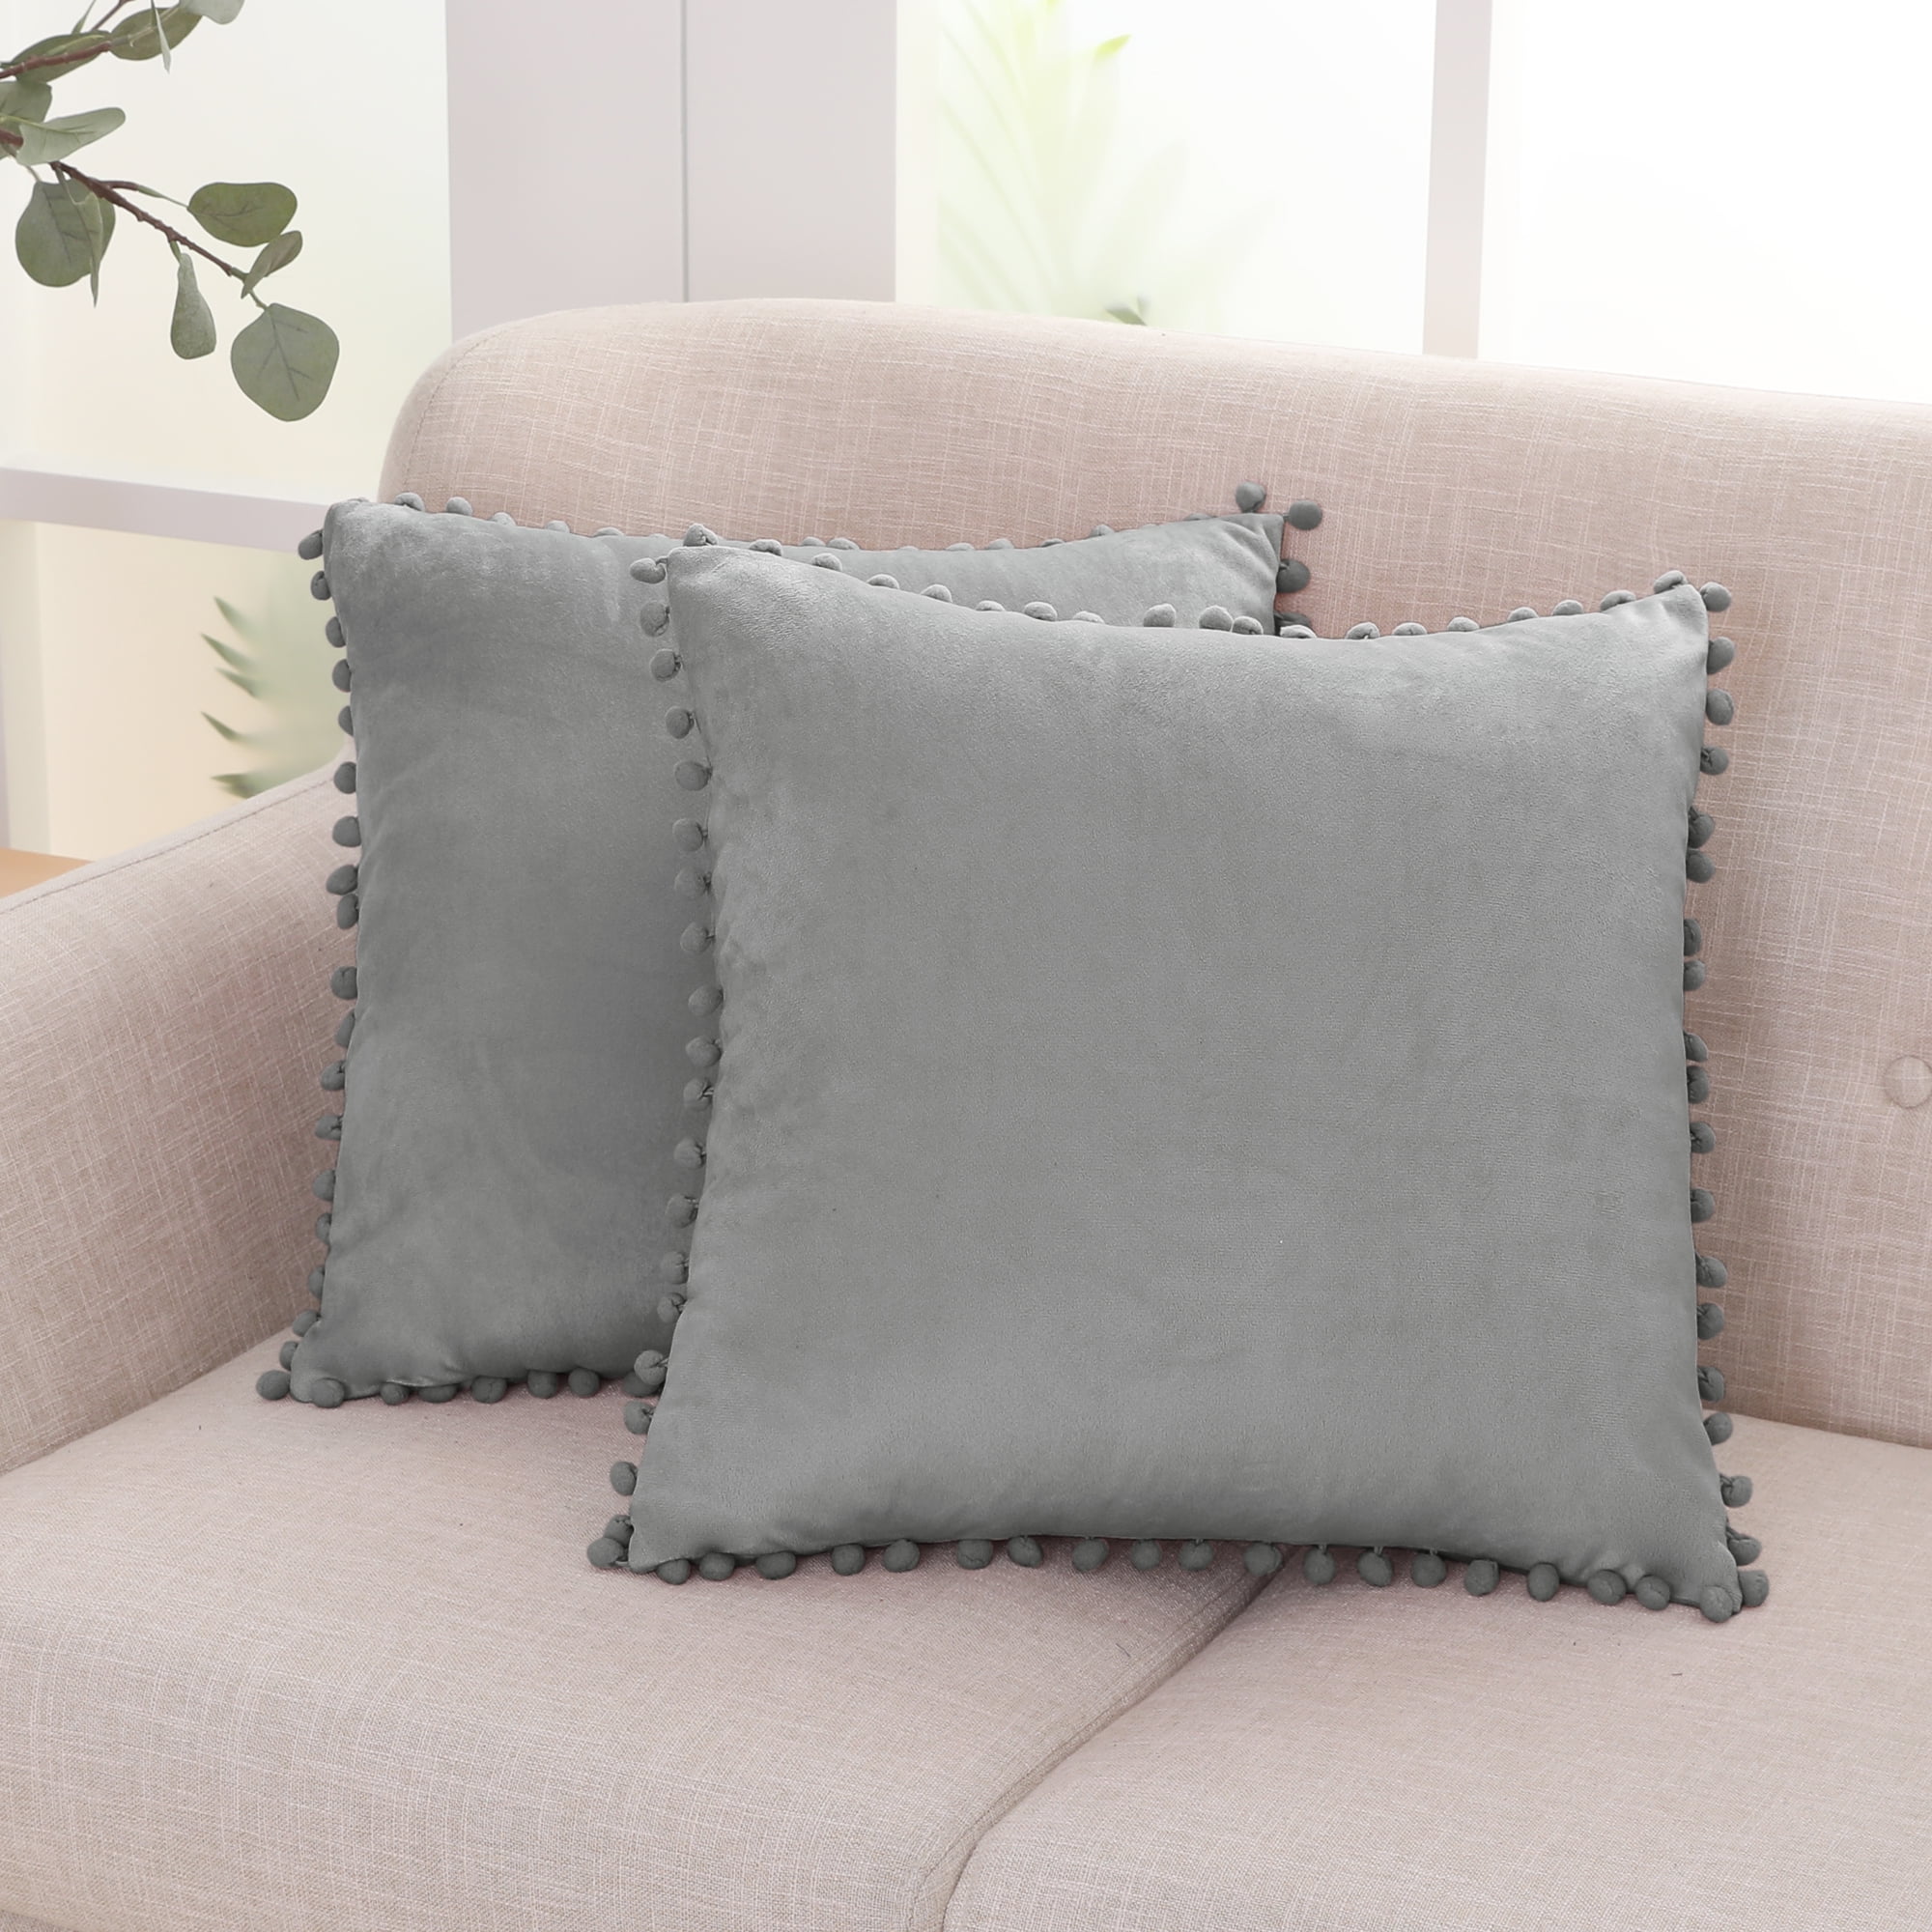 Home Brilliant 22x22 Pillow Cover Set of 2 Throw Pillows for Couch Striped  Velvet Large Cushion Covers for Chair, 55x55 cm, 22 x 22 Inch, Cream Cheese